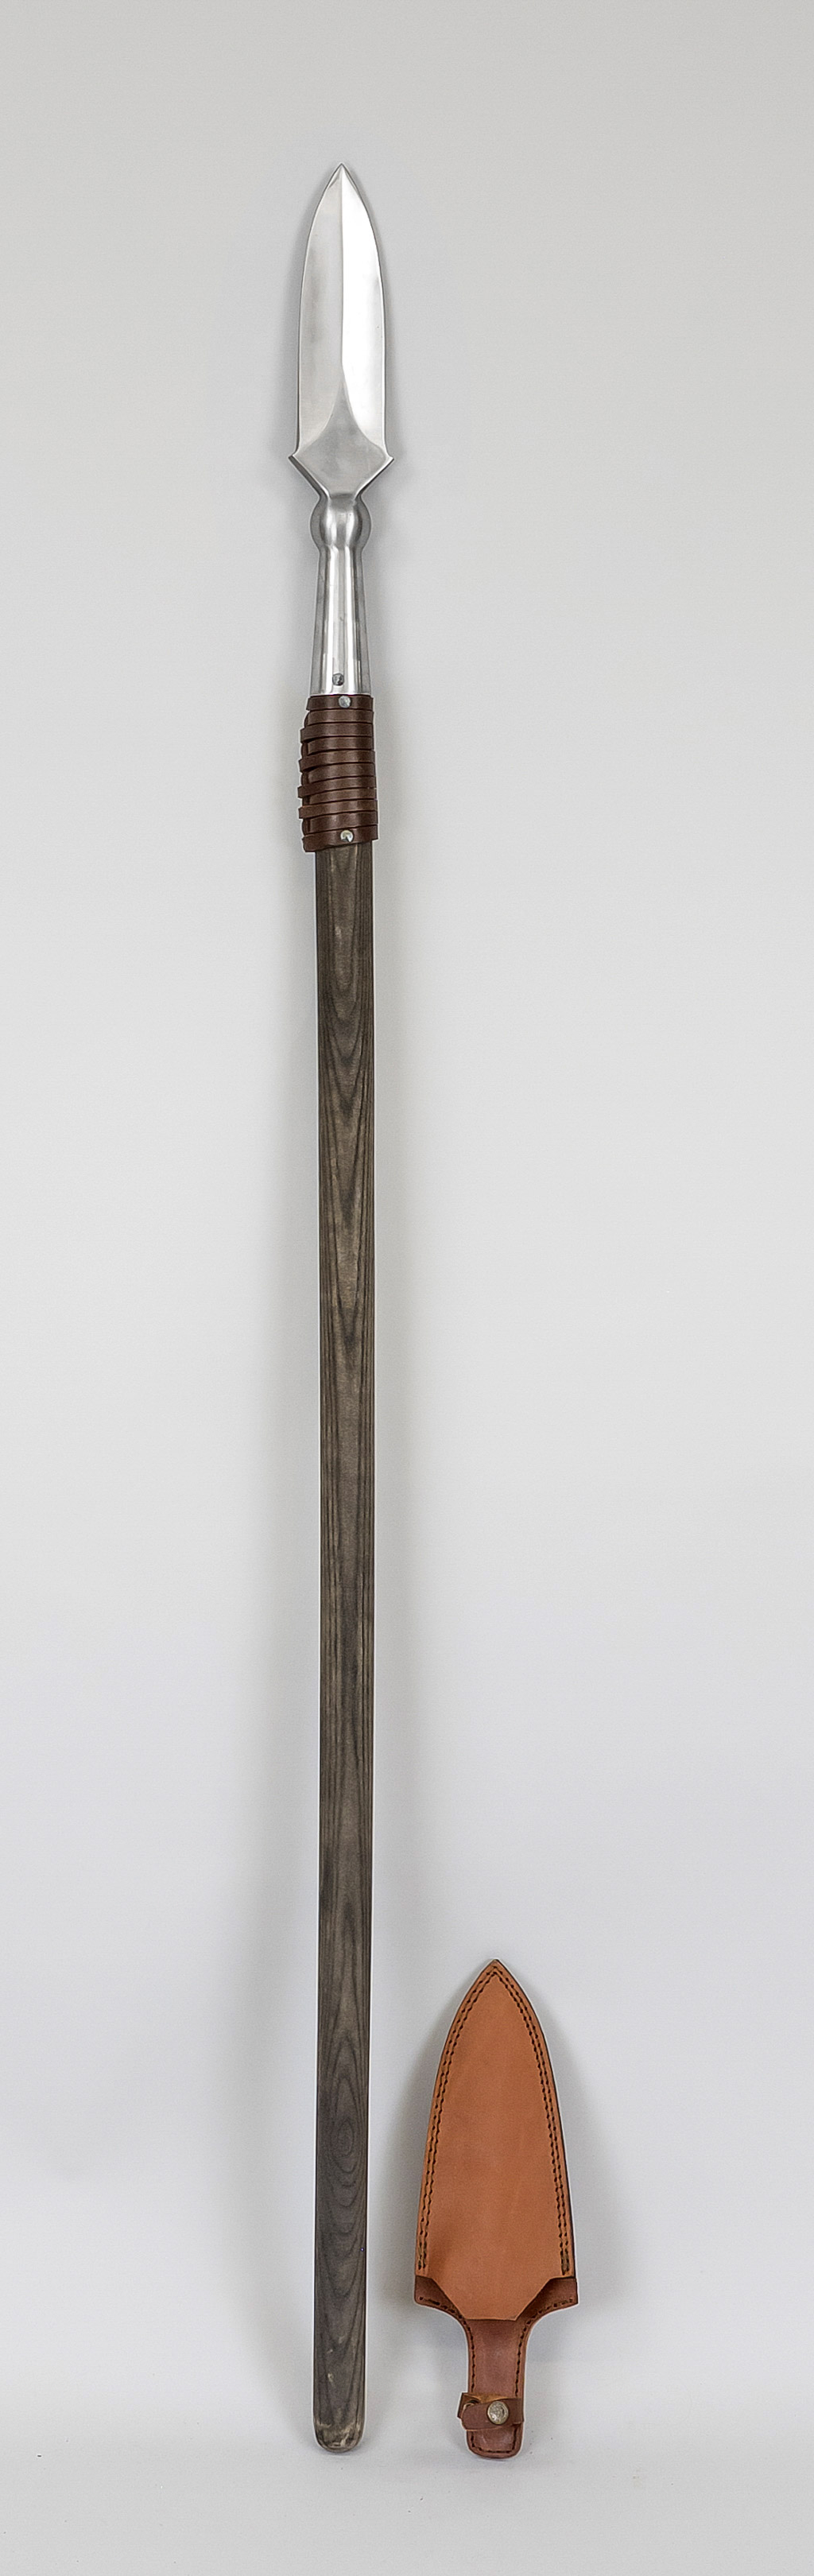 Saufeder or Sauspieß, late 20th century, wood and steel. Heavy, massive construction, slightly